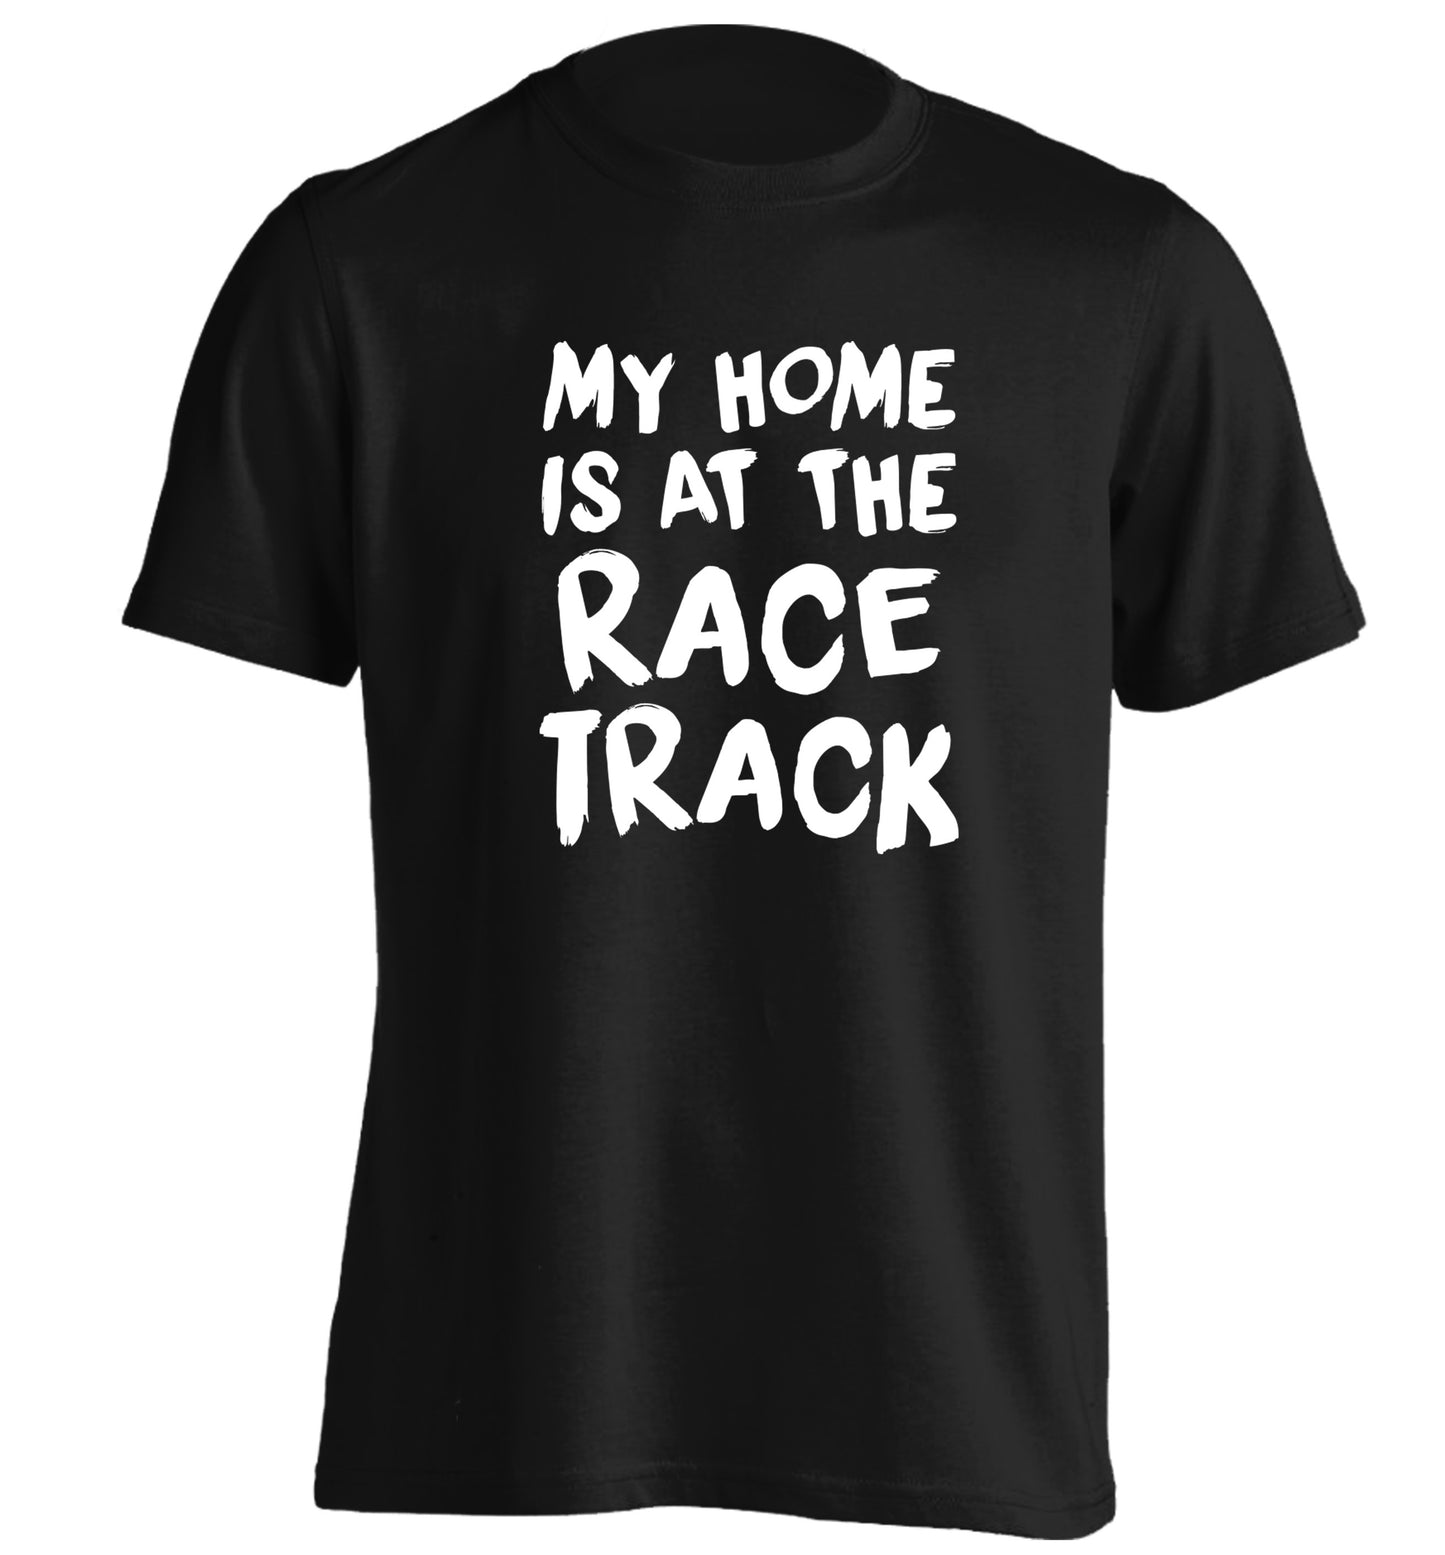 My home is at the race track adults unisex black Tshirt 2XL